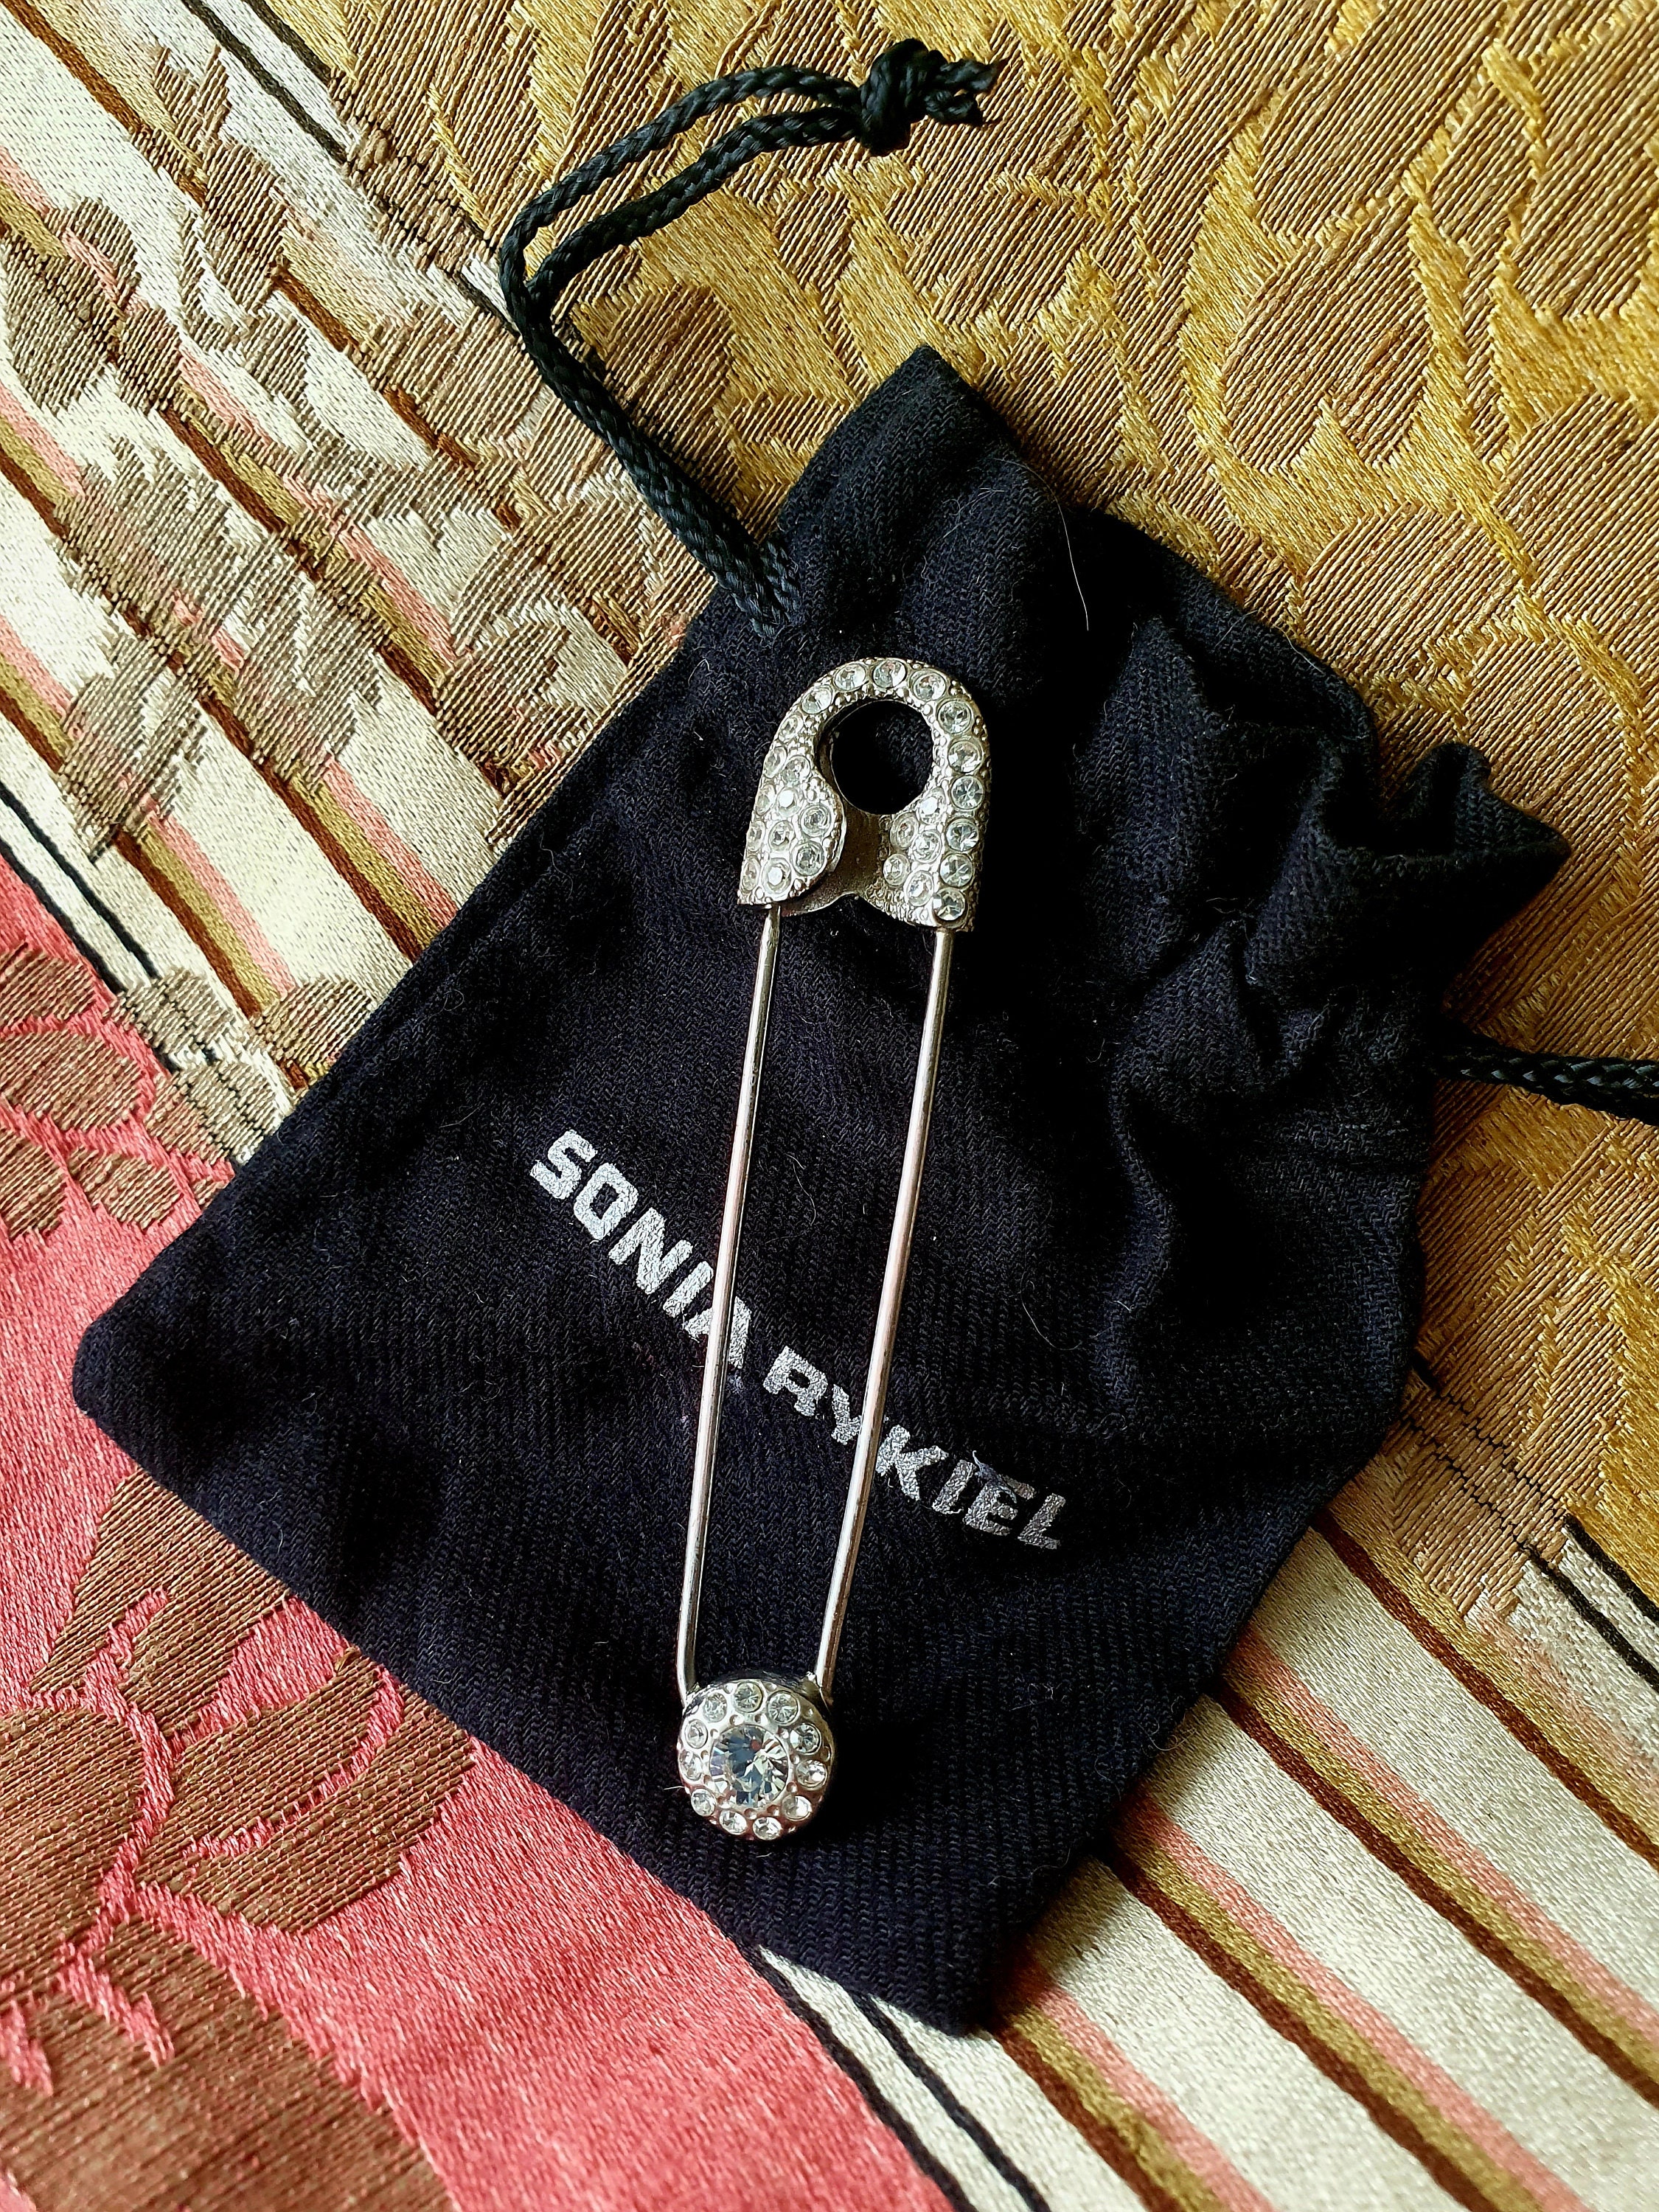 Chanel Safety Pin 